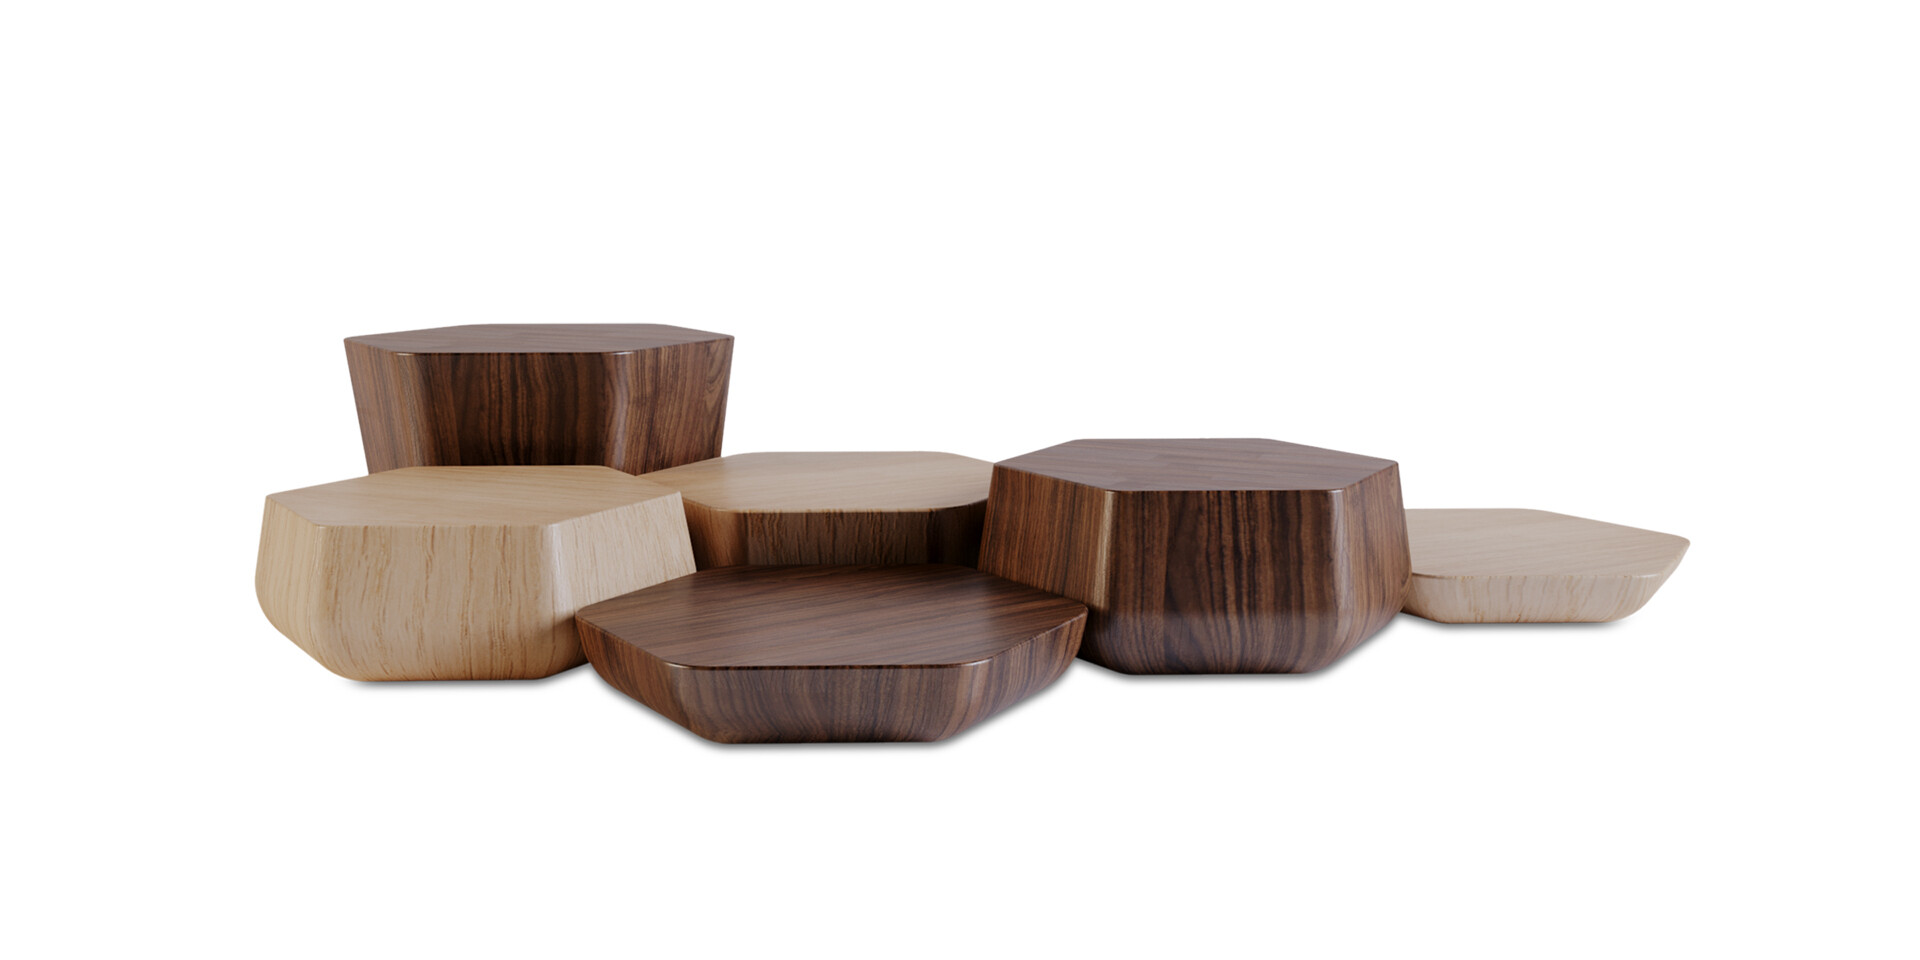 MCCOOL COFFEE TABLE Wood Version Front View ALMA de LUCE